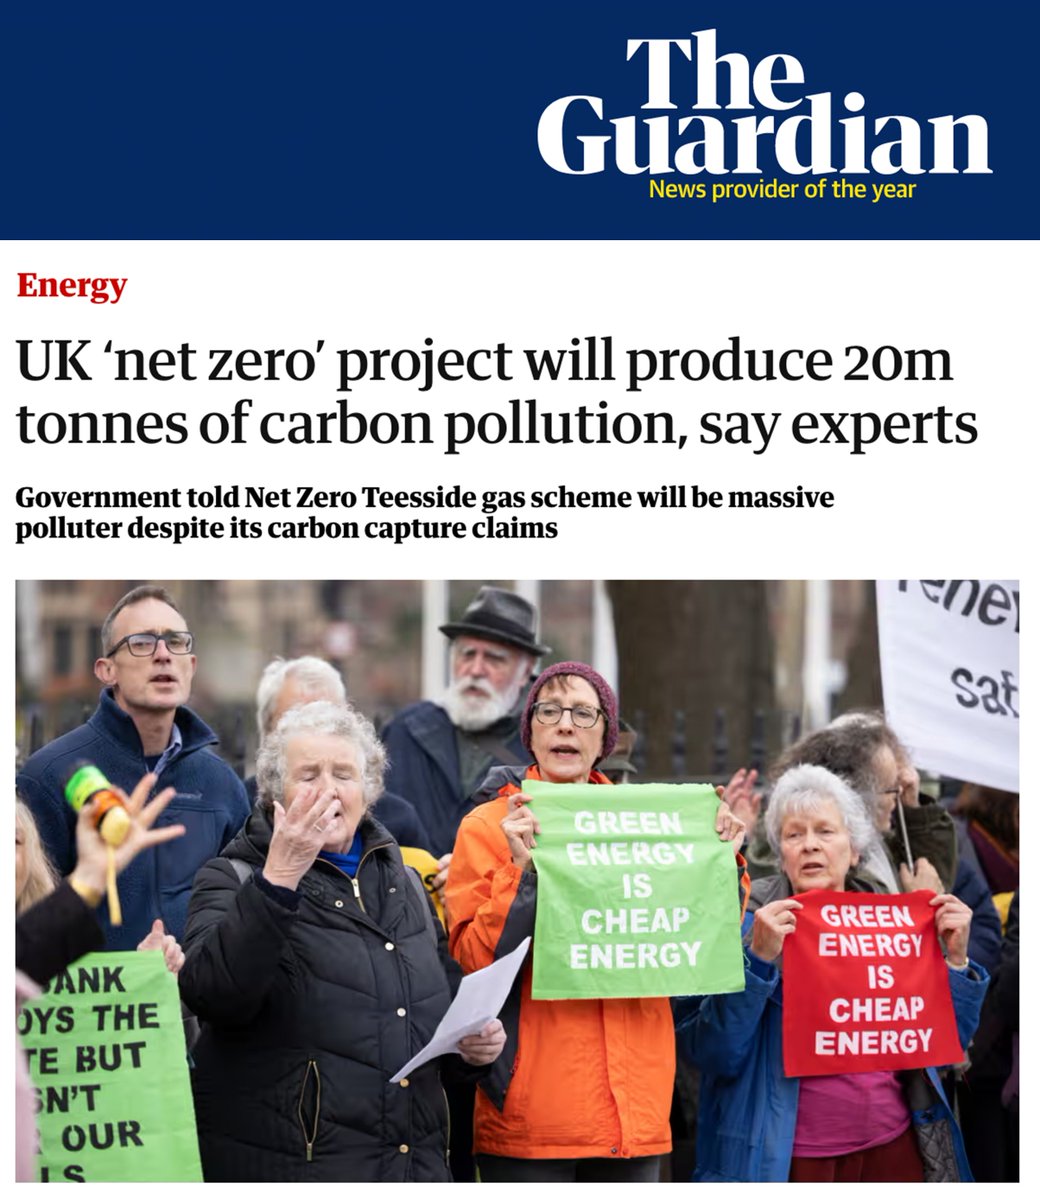 This is beyond greenwash - it’s green gaslighting. I’m supporting legal action against the government for consenting this fake net zero project. Overlook the fact that their numbers are based on carbon capture (an unproven technology) and 98% of emissions captured (a heroic